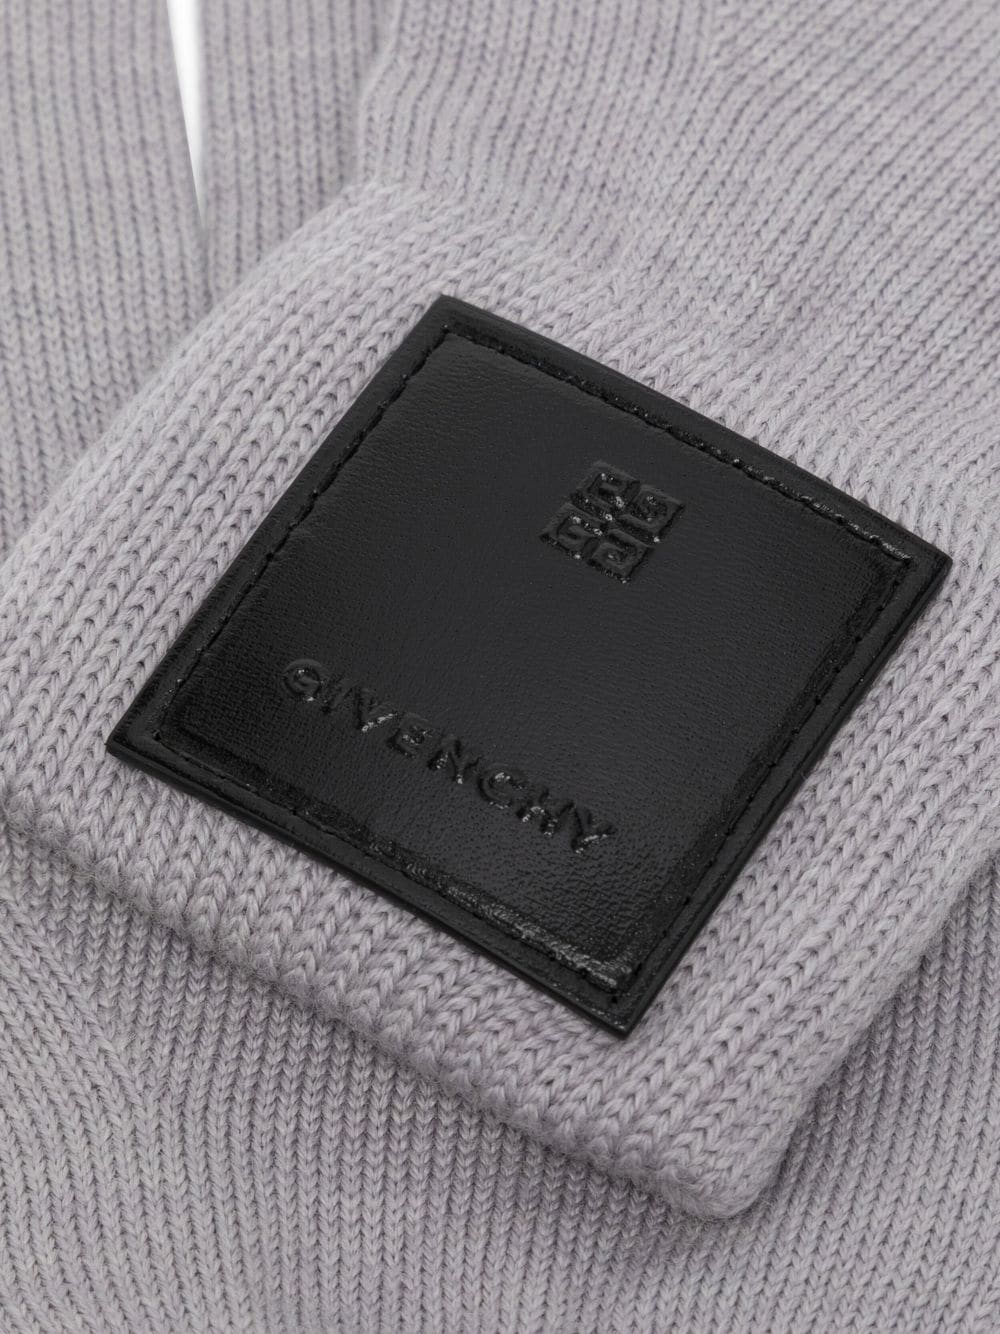 Givenchy Logo-patch Woollen Gloves in Gray for Men